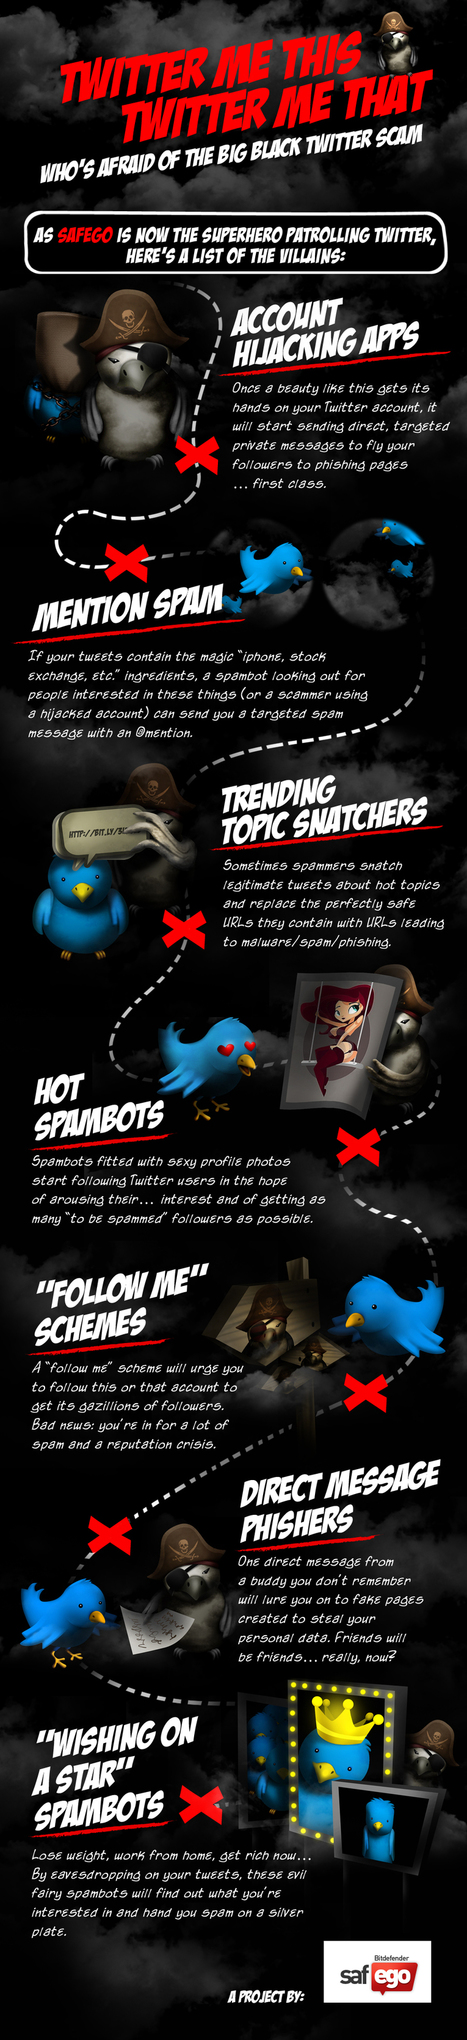 [Infographic] Types of Twitter Scams | Social Media and its influence | Scoop.it